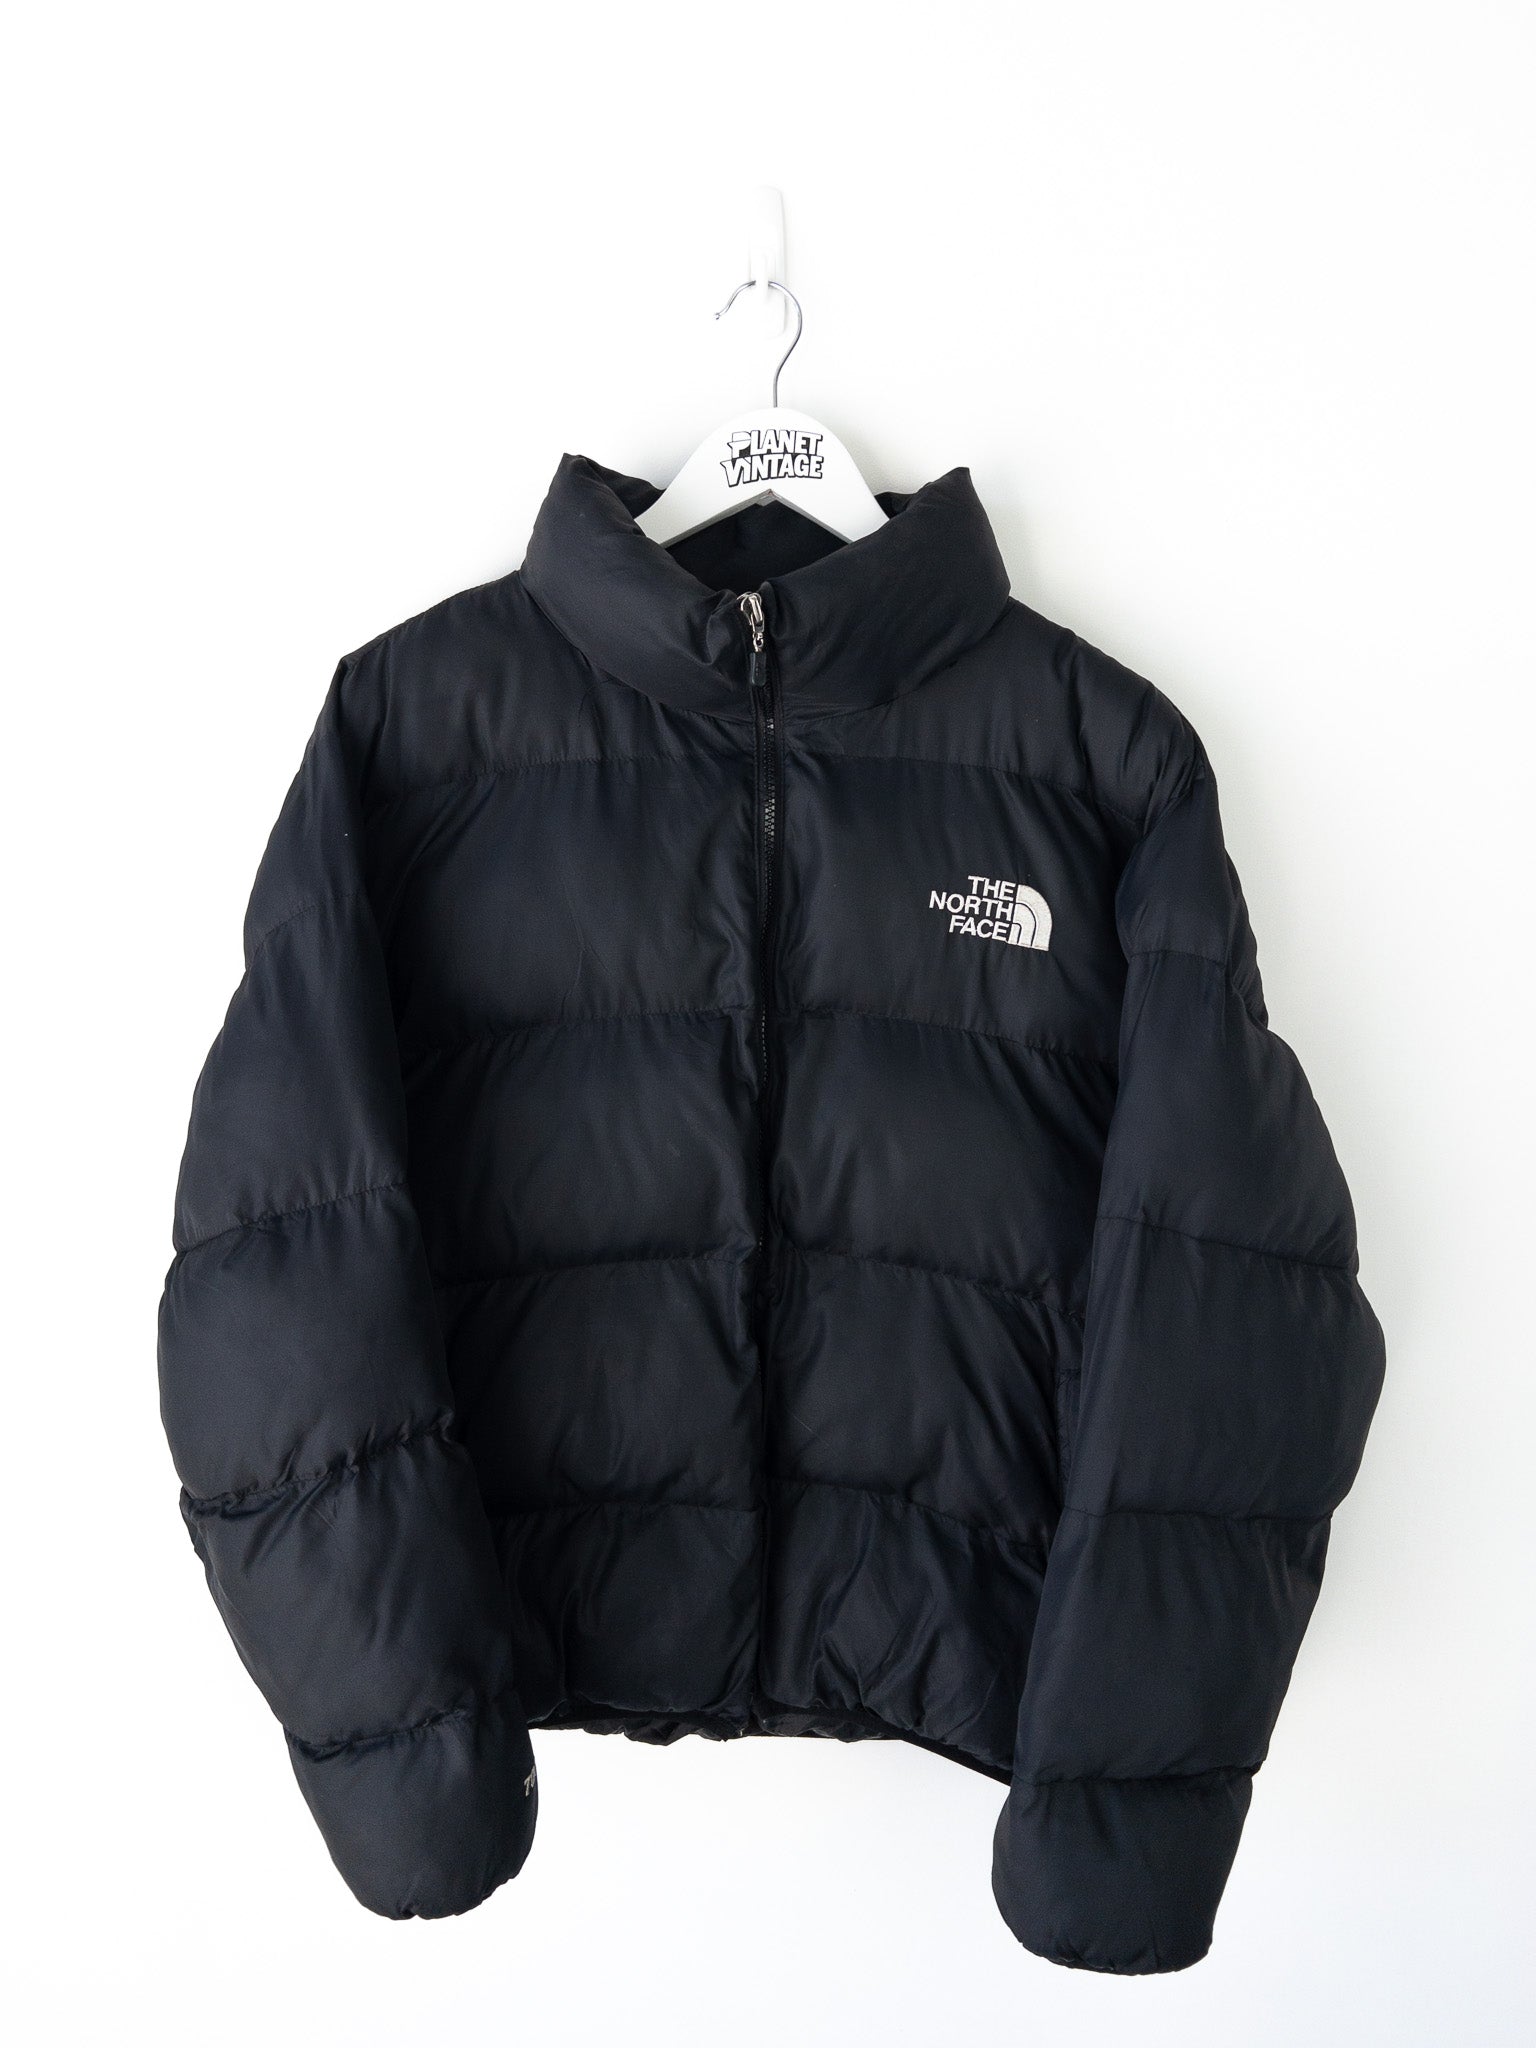 Vintage The North 700 Face Puffer Jacket (L)